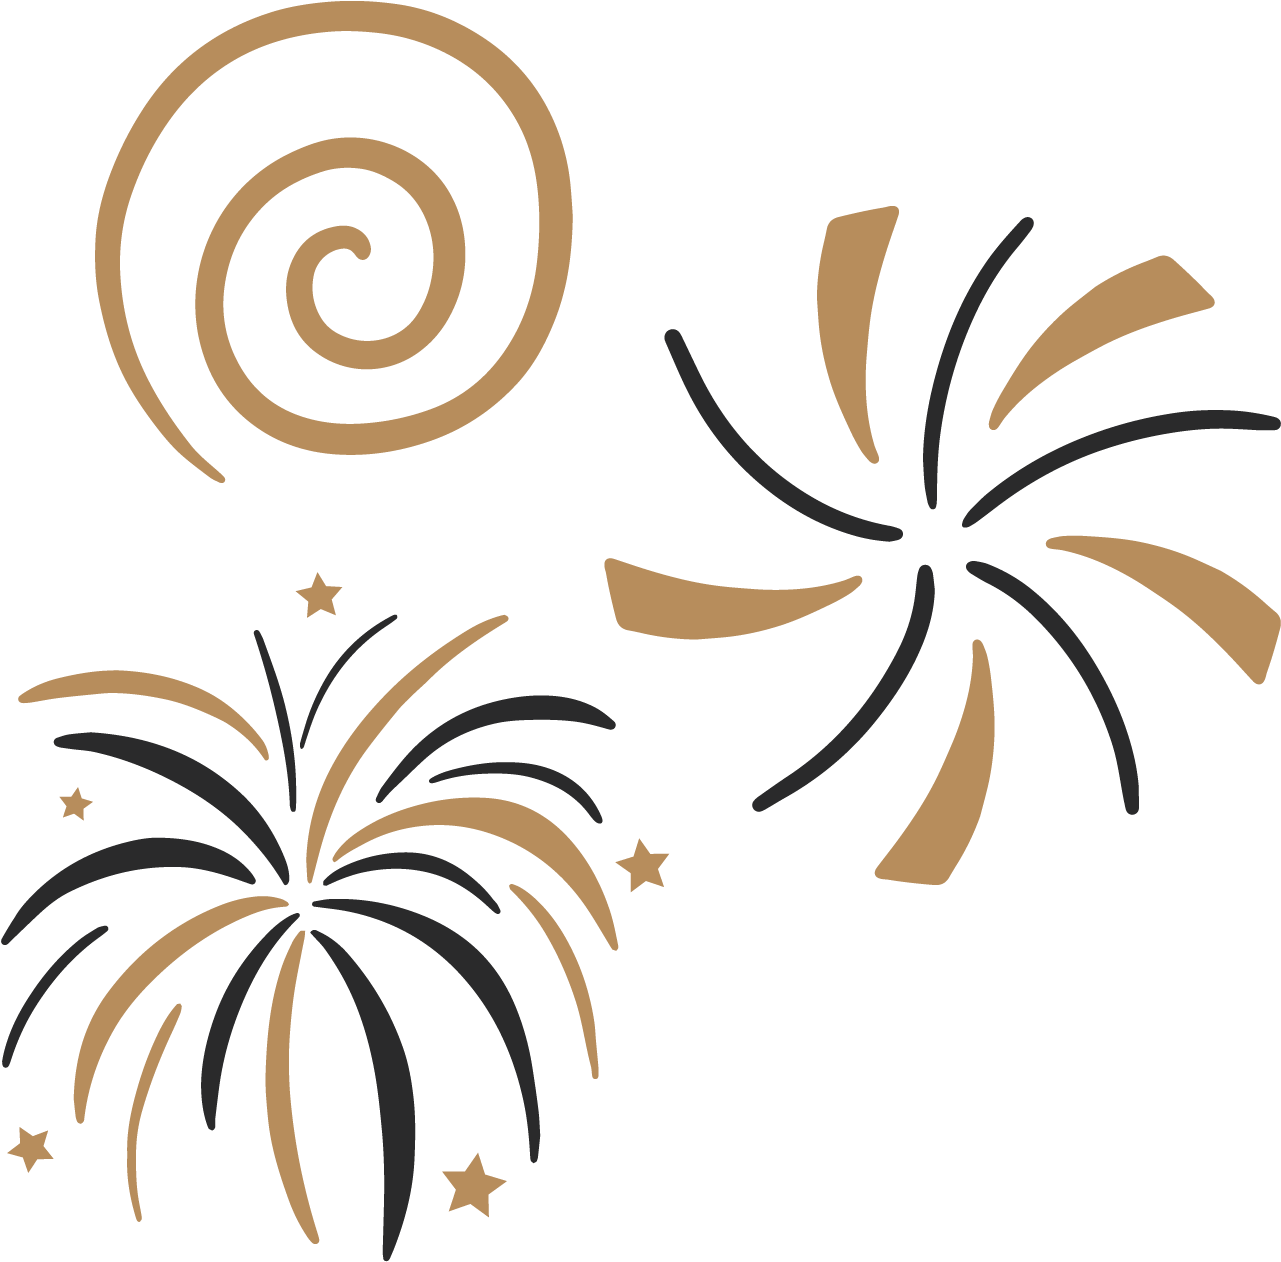 Abstract Fireworks Graphic PNG